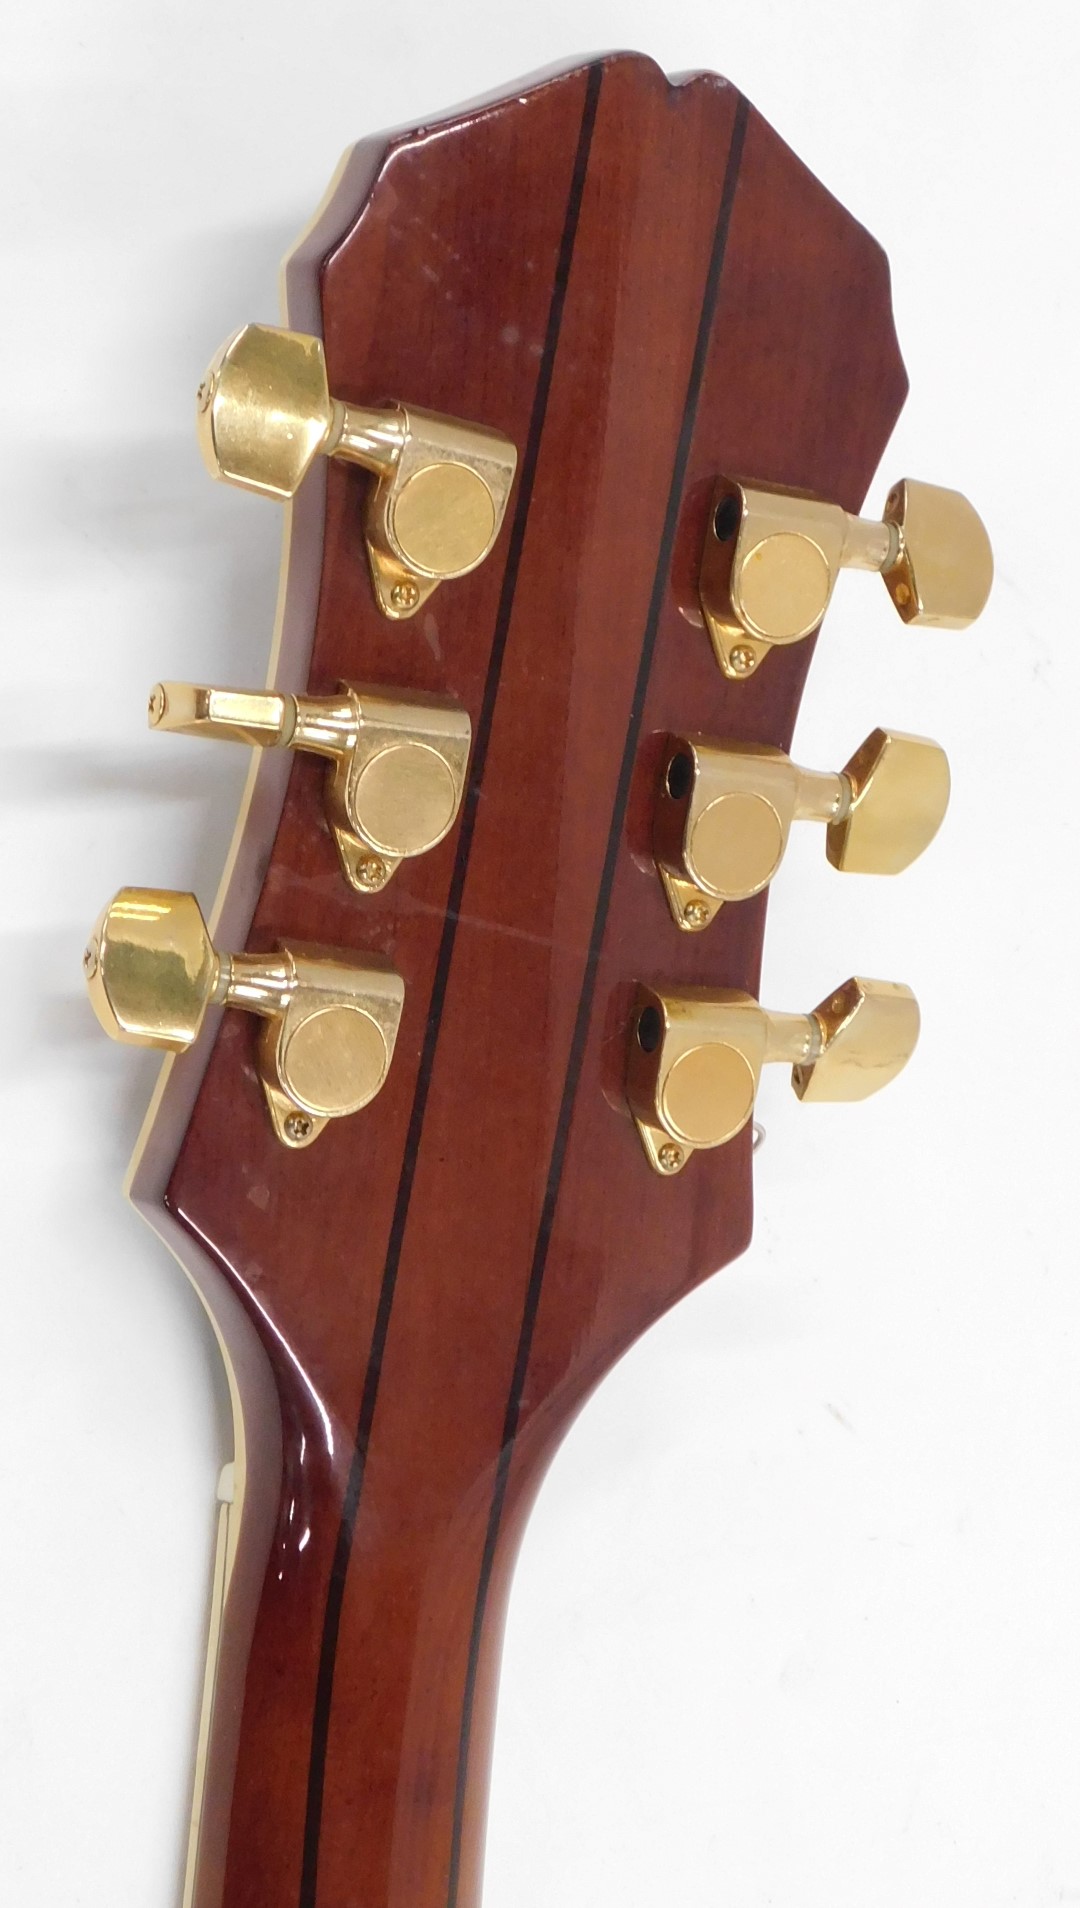 An Epiphone ES-335 electric guitar, with mother of pearl fret inlays, with padded travel case. - Image 5 of 8